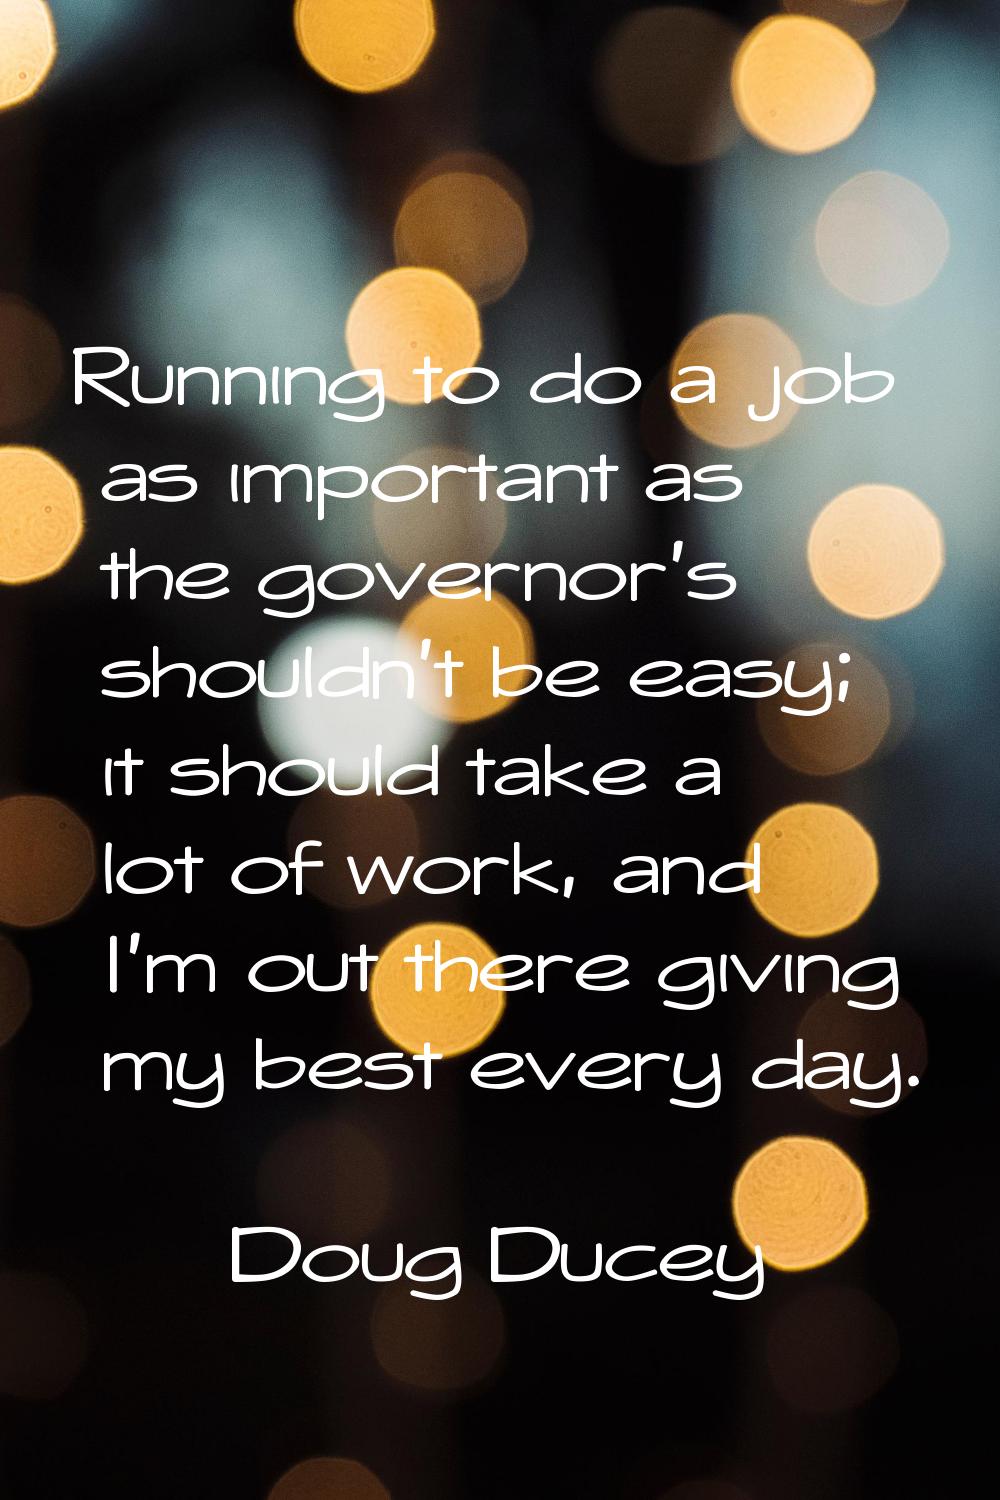 Running to do a job as important as the governor's shouldn't be easy; it should take a lot of work,